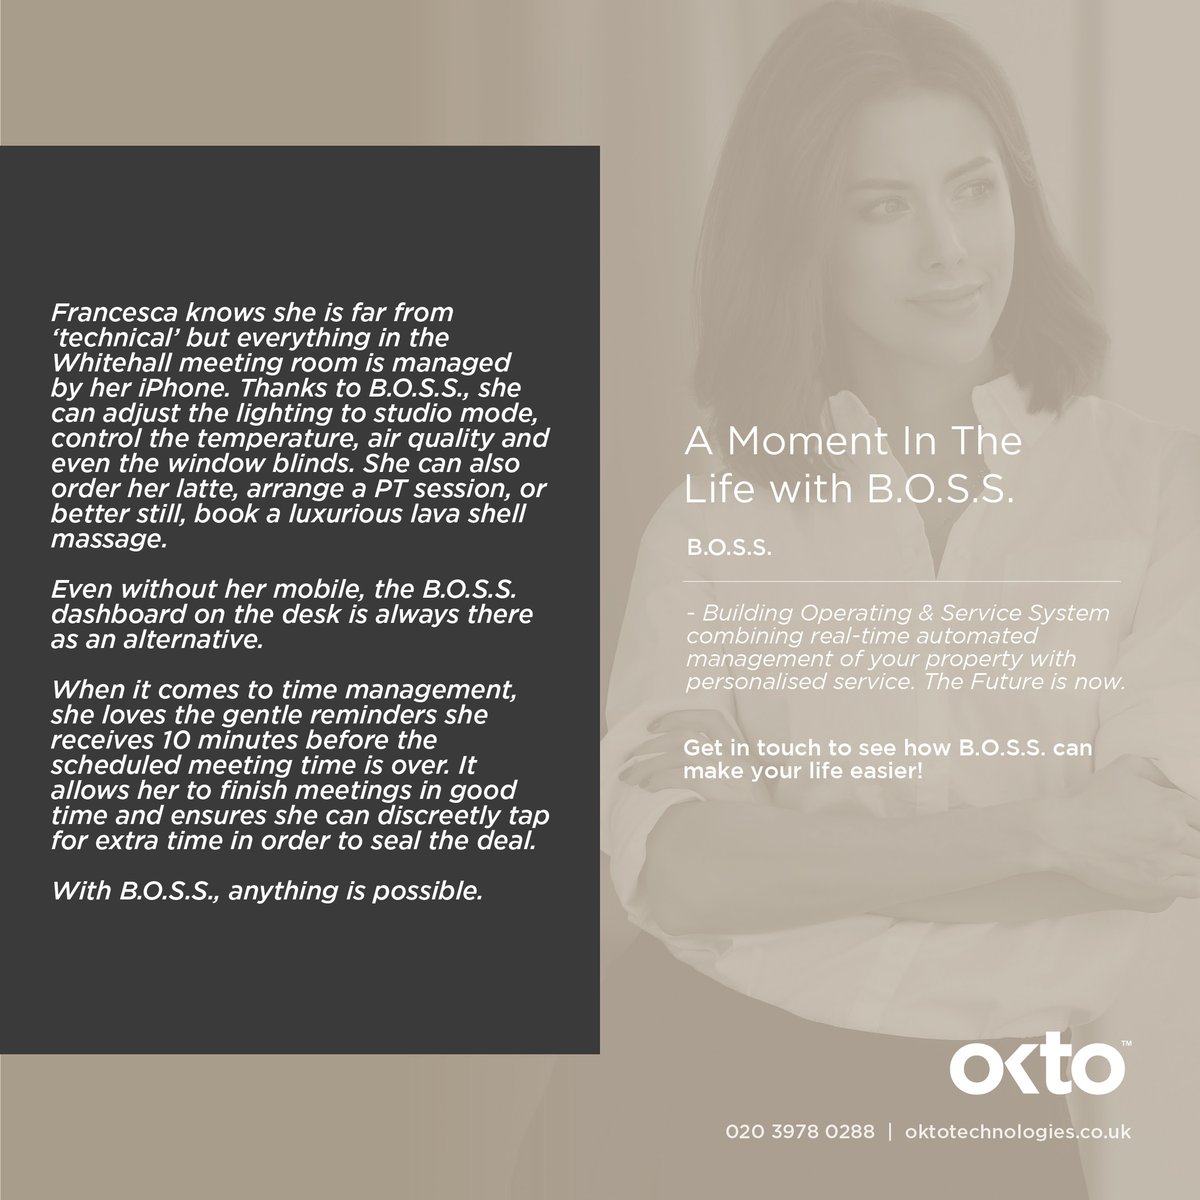 A moment in the life with B.O.S.S. Meetings made effortless with all the technical details at your fingertips, designed to make your work and life - easier. To find out more, visit oktotechnologies.co.uk #jobsearch #careers #jobopening #oktotechnologies